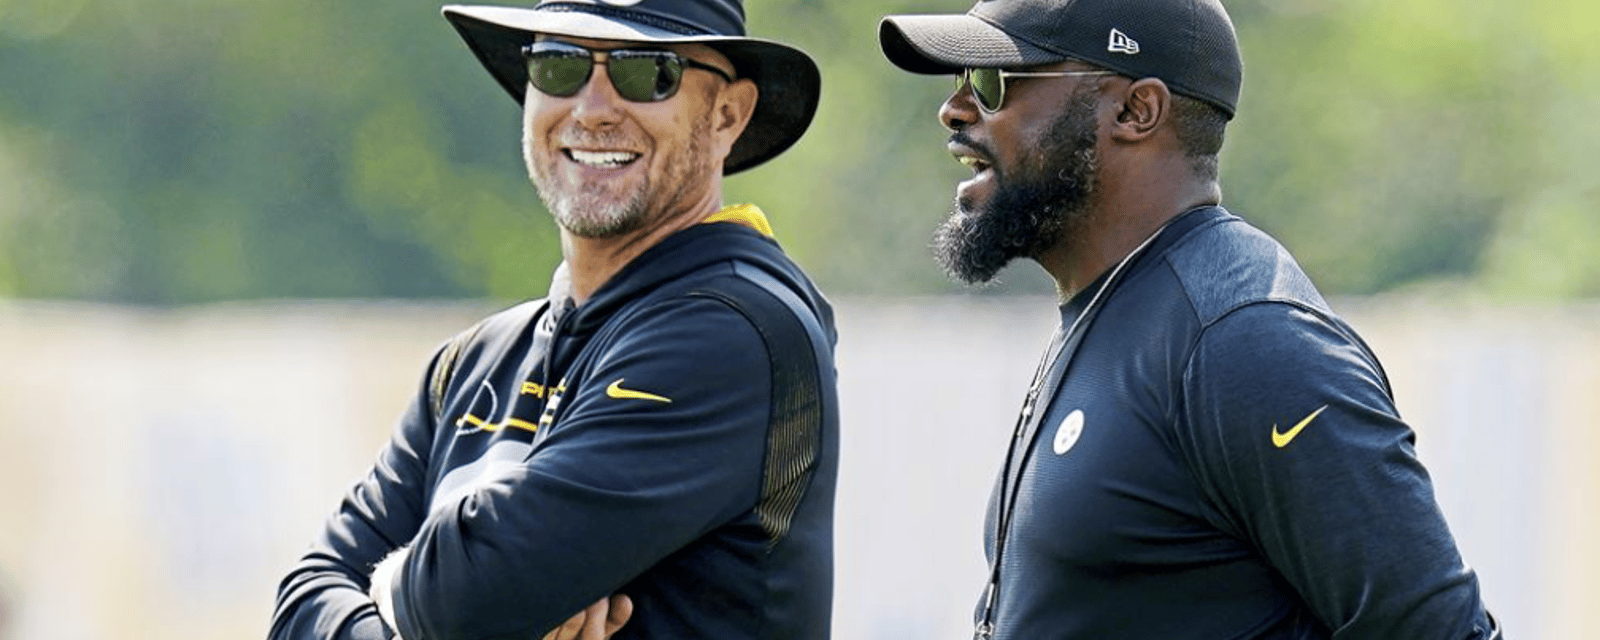 Mike Tomlin: “Hell yes” changes are coming! 